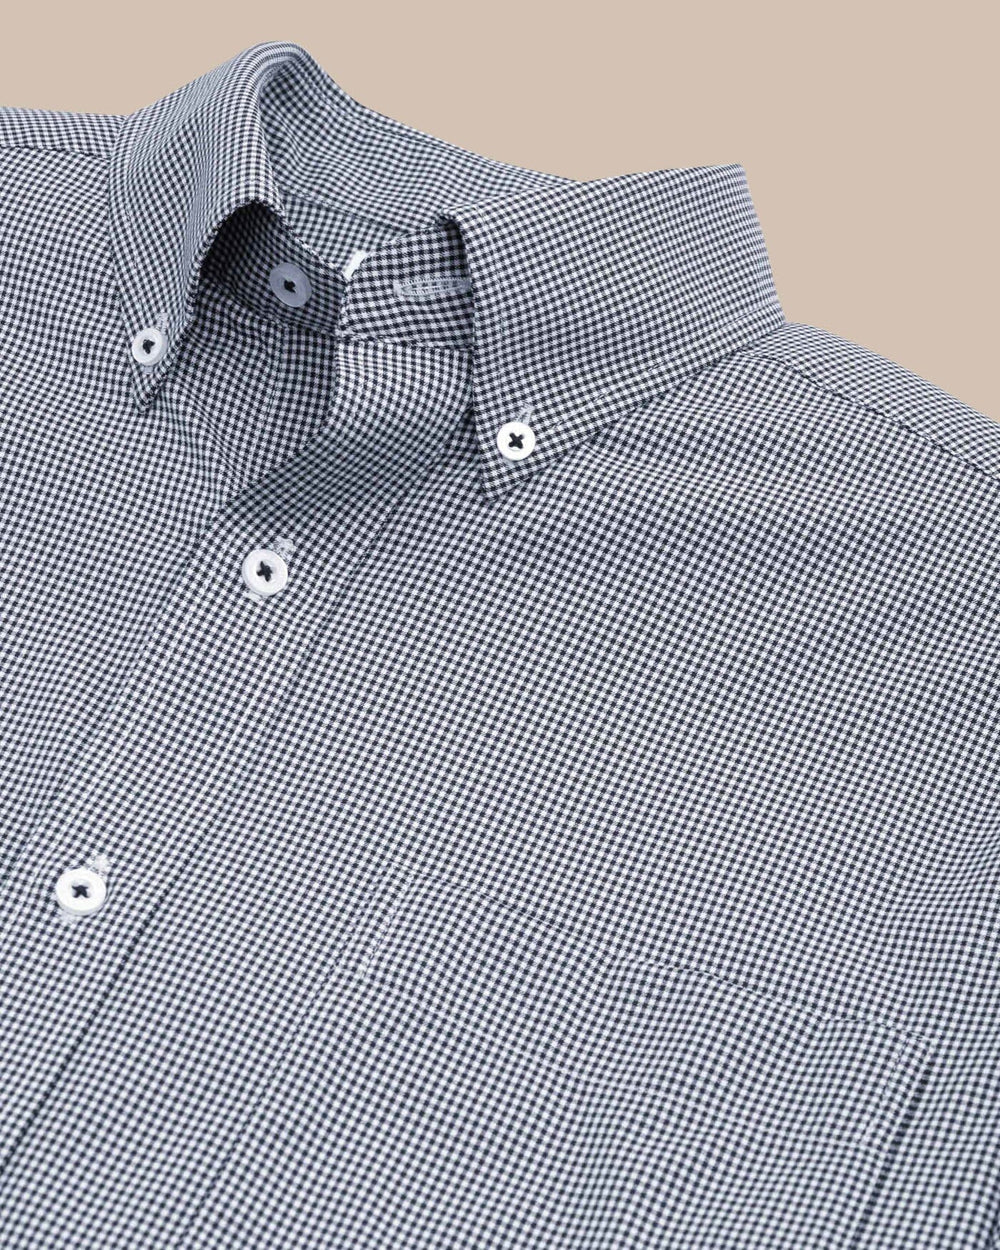 The detail view of the Southern Tide Team Colors Gingham Intercoastal Sport Shirt by Southern Tide - Navy